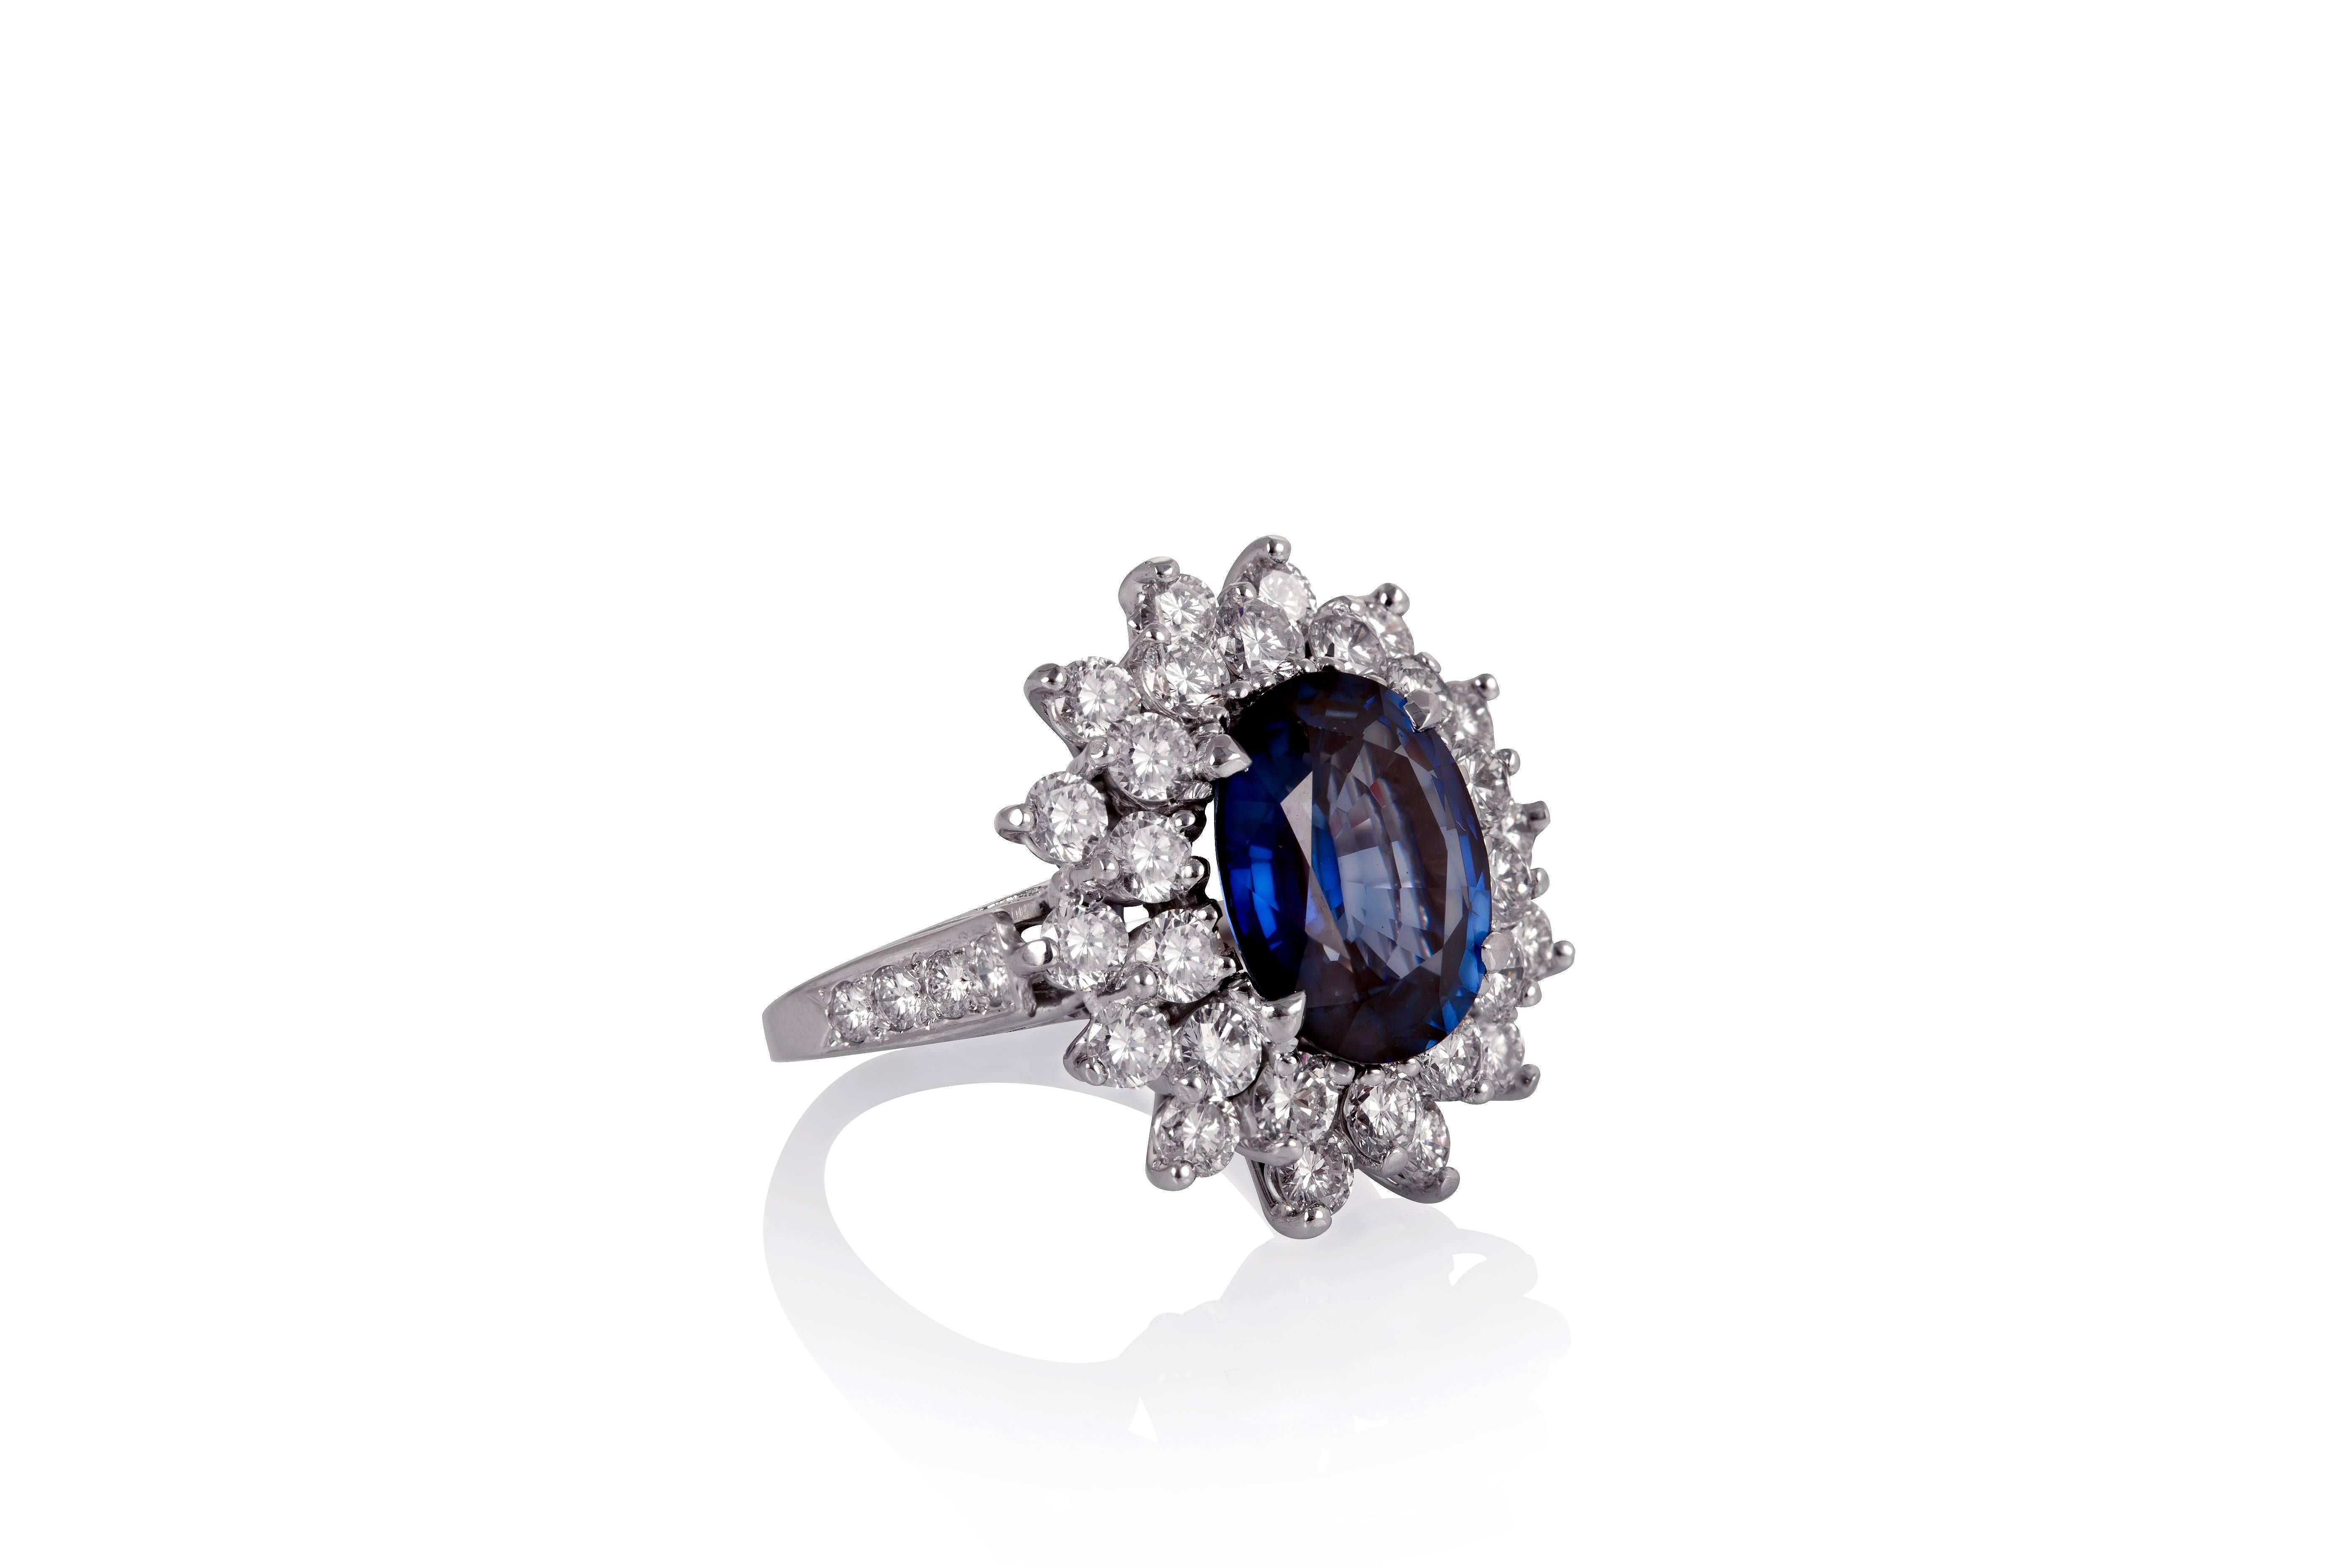 Boasting a beautiful step-cut oval sapphire weighing 6.95 carats, this ring is enhanced by a cluster of round brilliant diamonds, weighing an estimated 3.35 carats.
Ring size: 6 3⁄4